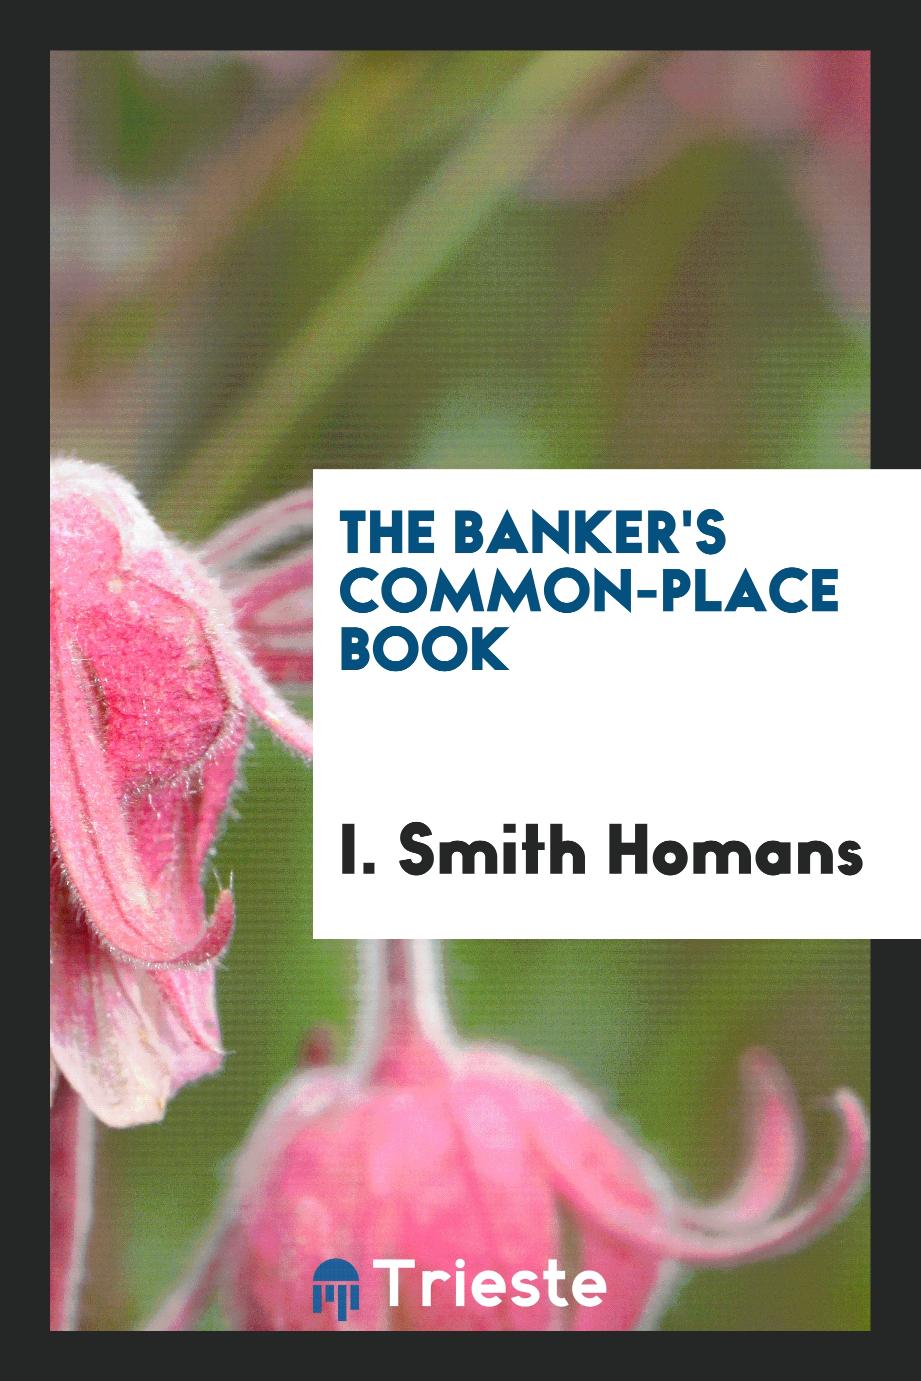 The Banker's common-place book